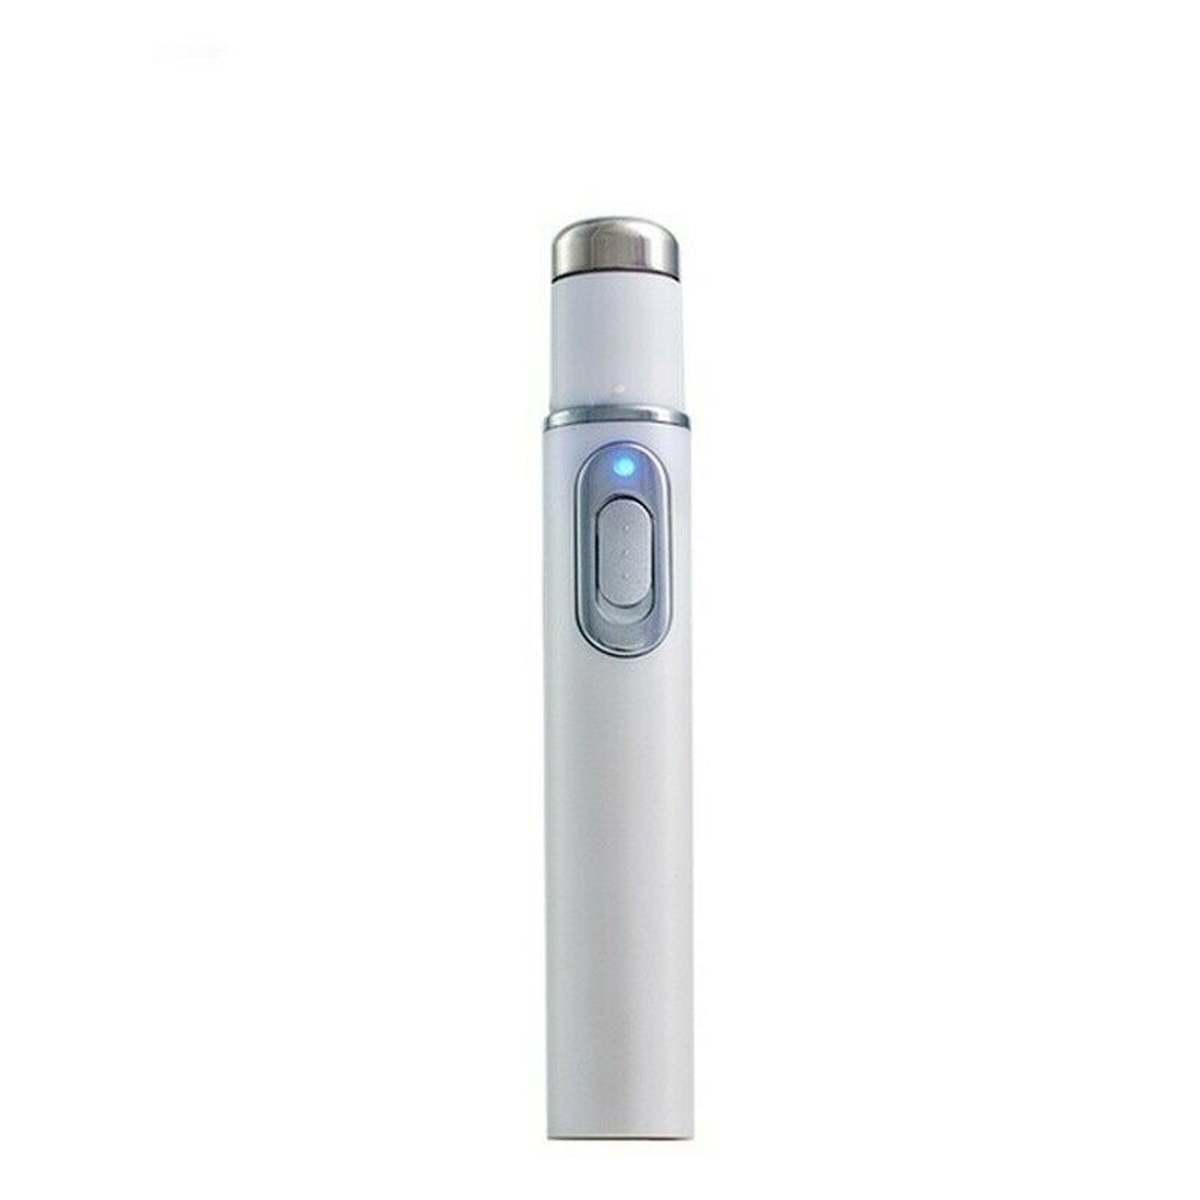 RUEWEY Medical Blue Light Therapy Laser Treatment Pen Acne Skin Care Device - image 2 of 5